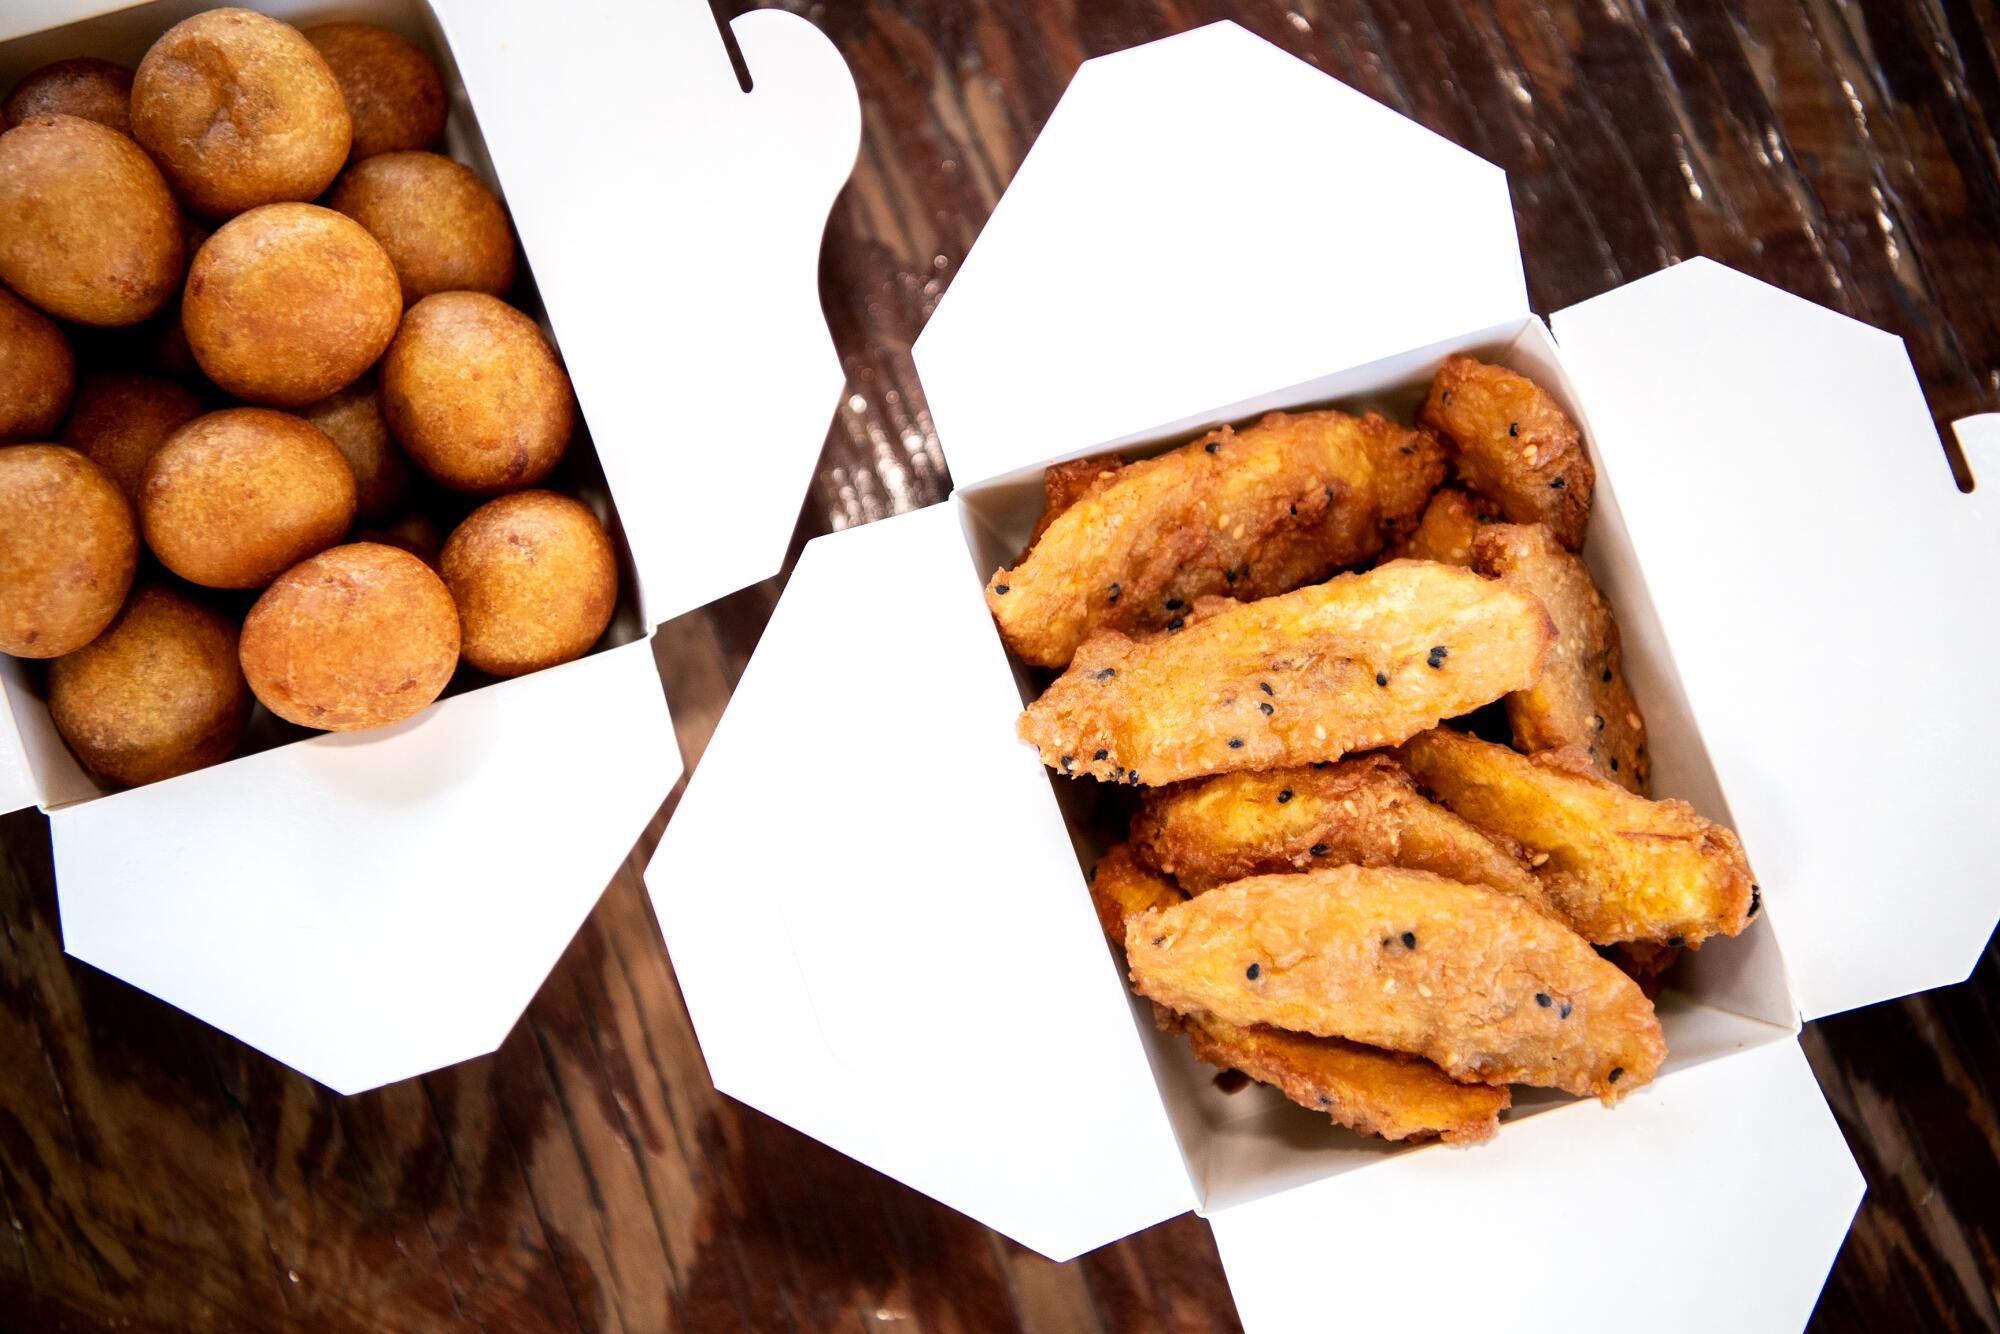 Cardboard boxes hold two kinds of fried desserts.